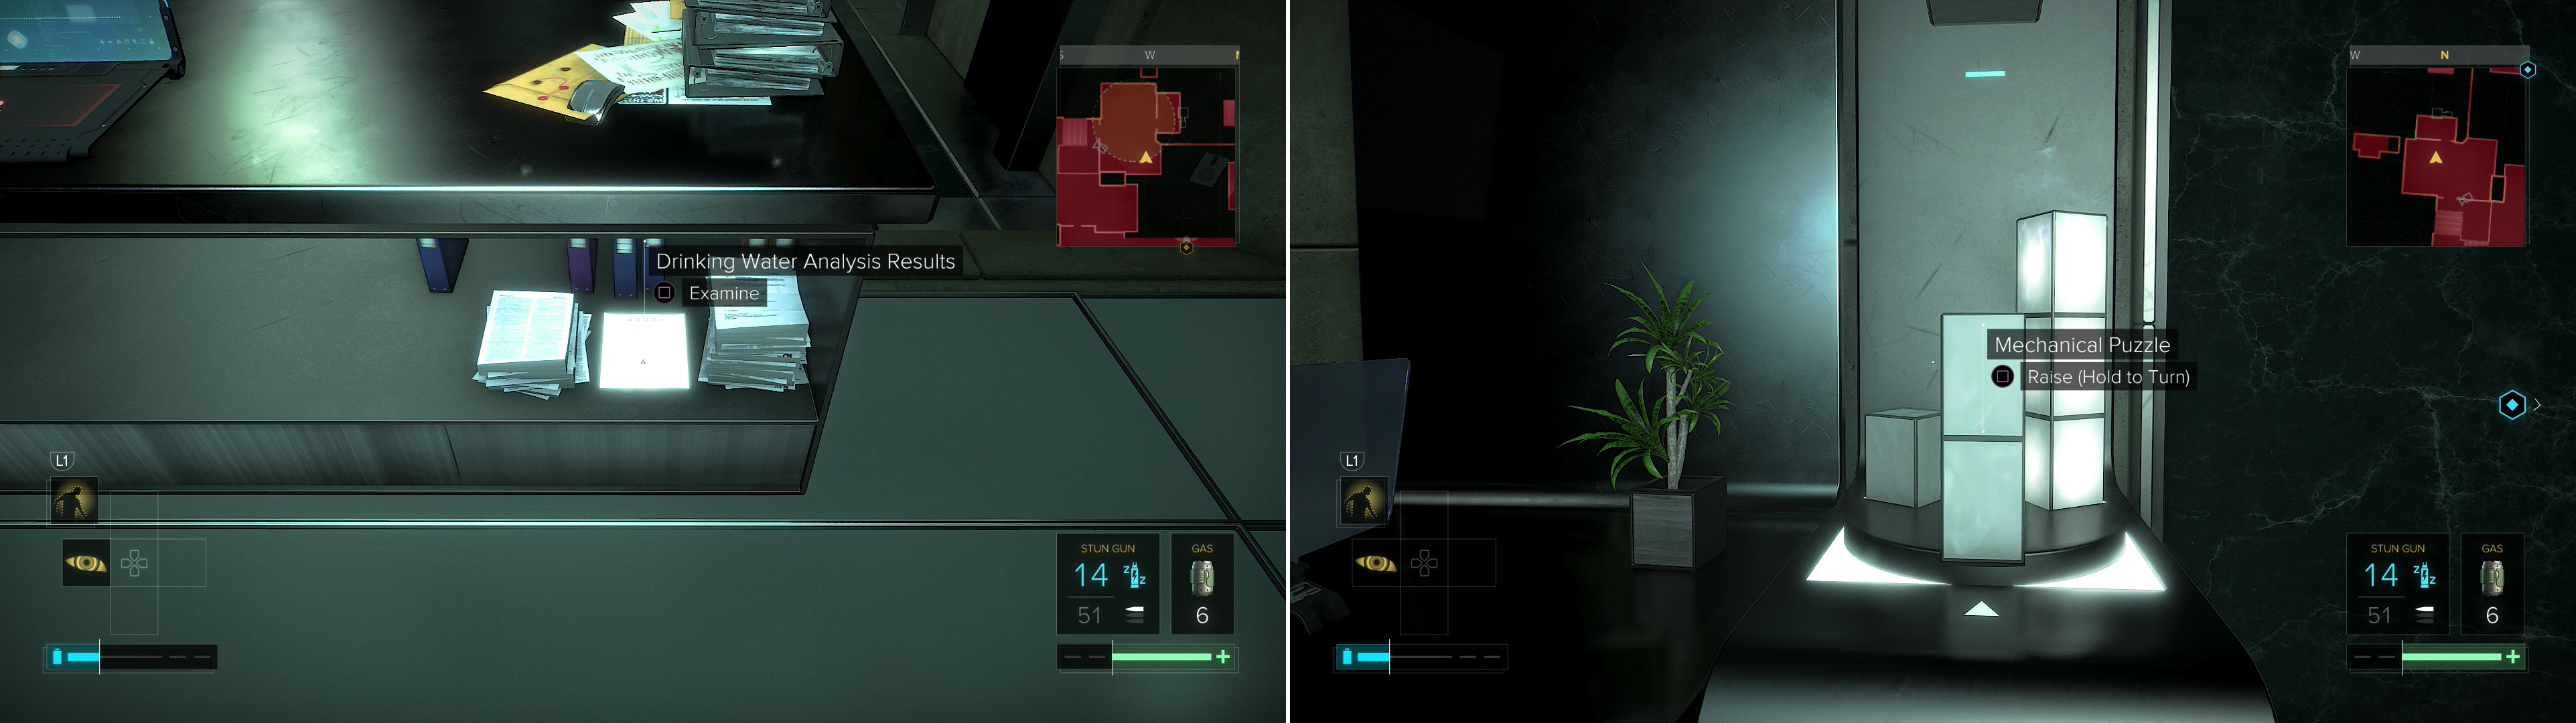 Search the CEO Offices to find the Drinking Water Analysis Results (left). Solve a Mechanical Puzzle to open up a secret room (right).